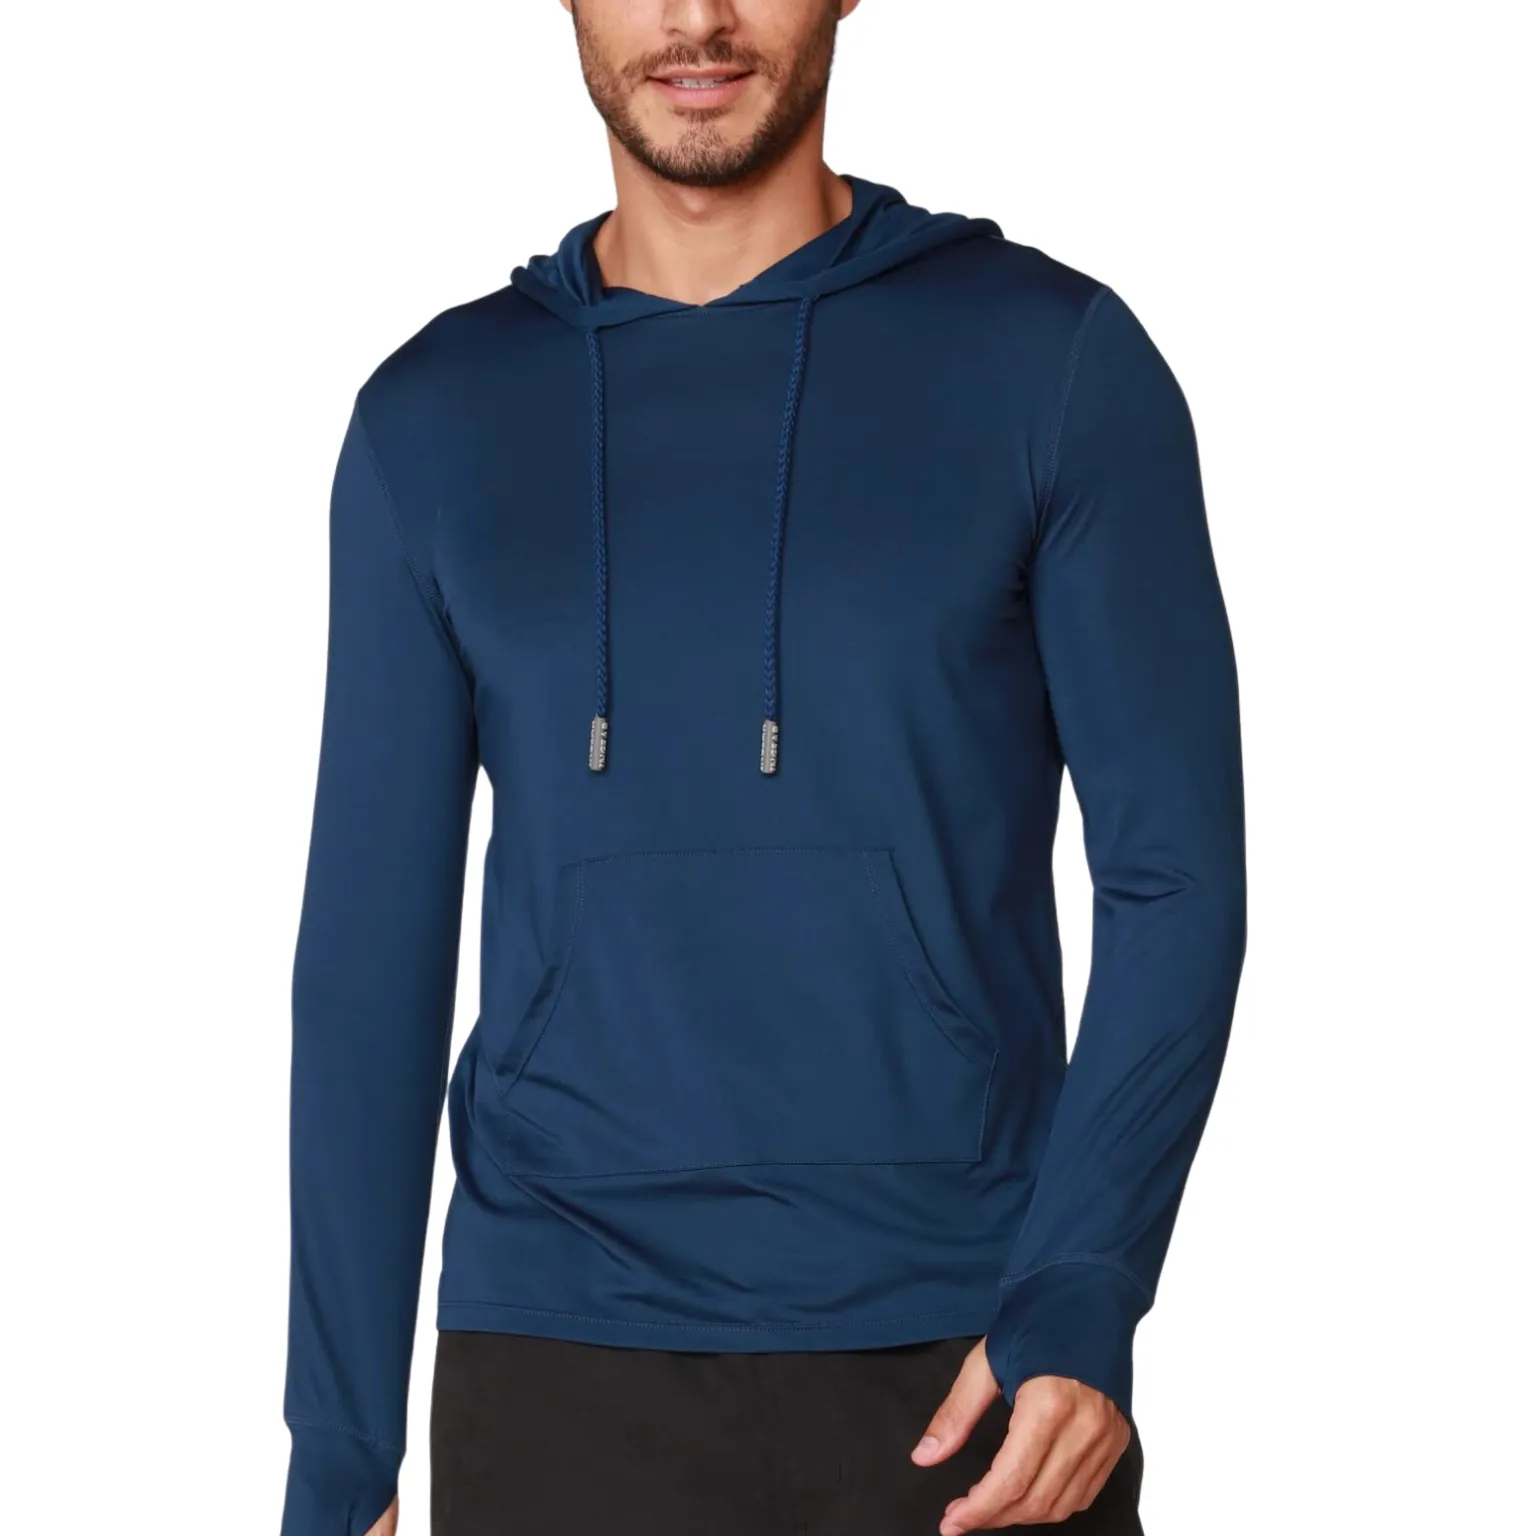 Running Hoodie manufacturing with trendy designs